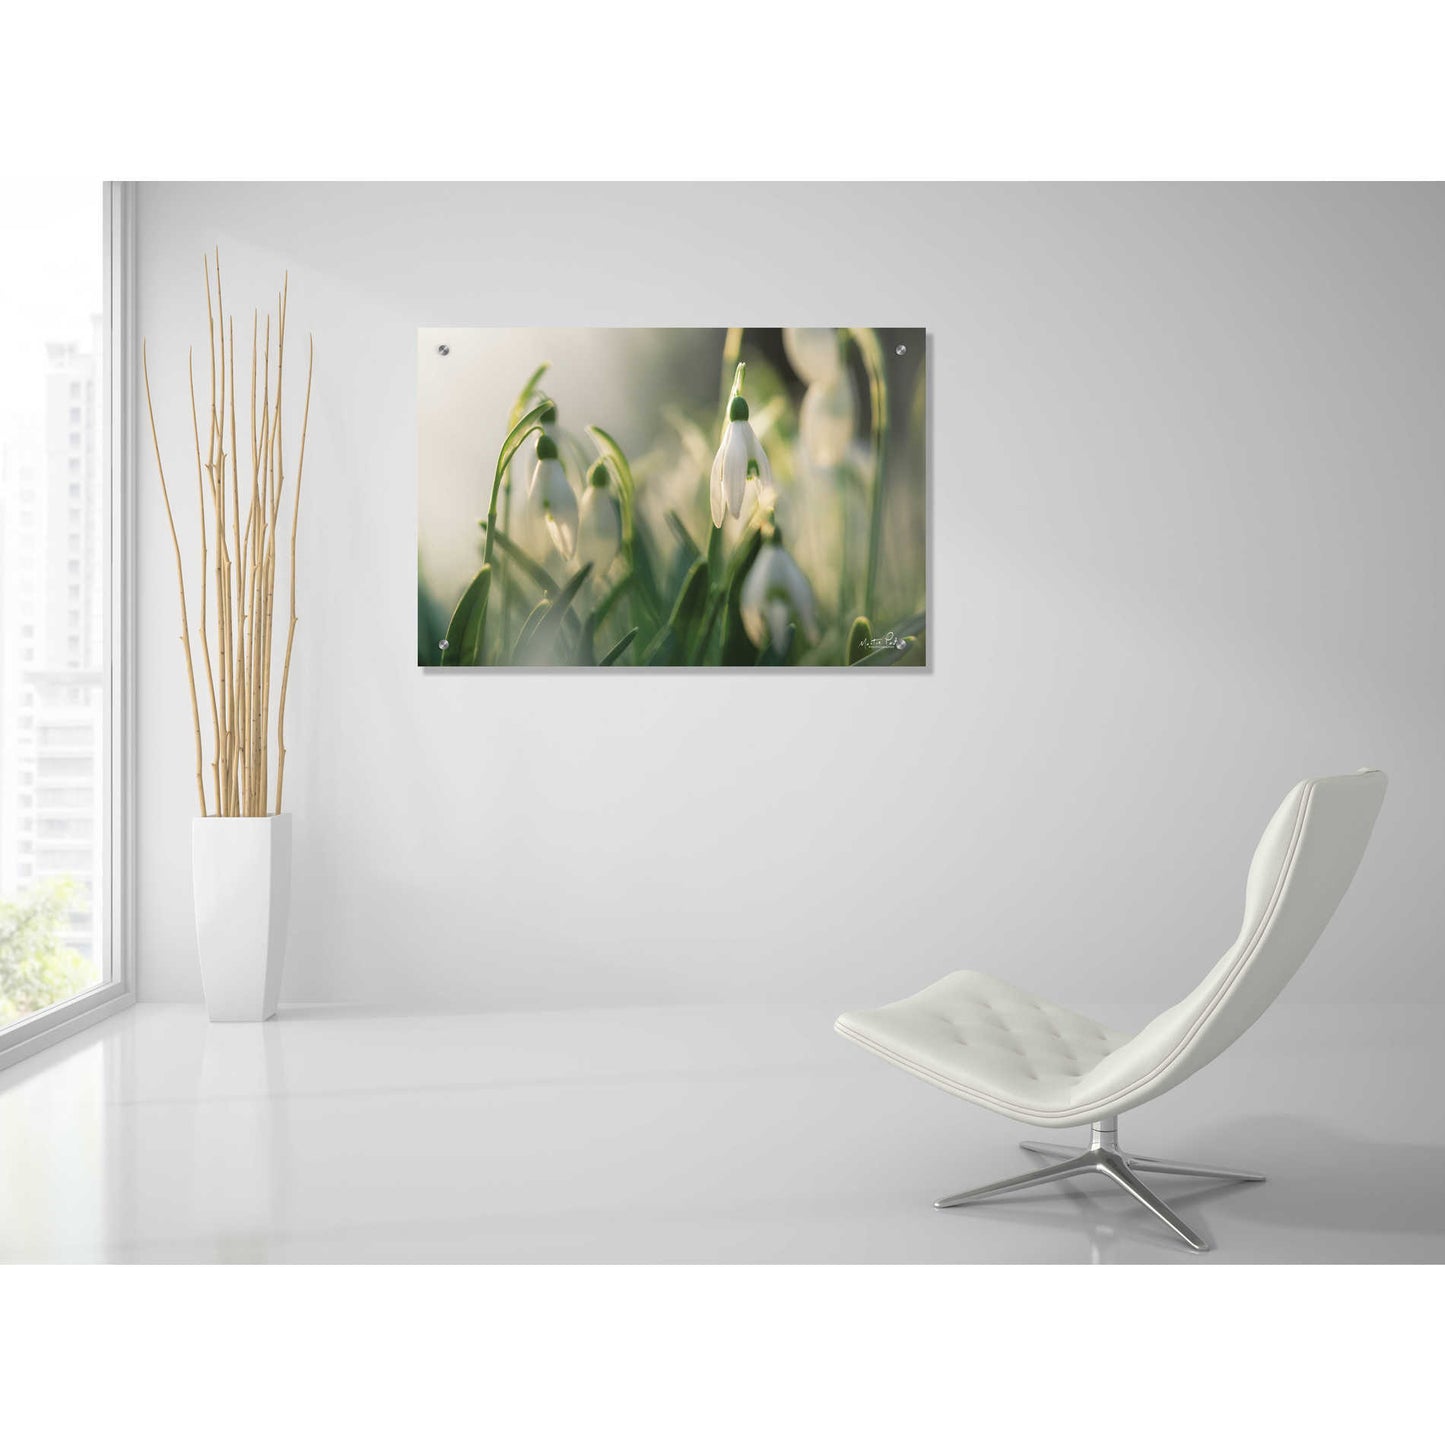 Epic Art 'Snowdrops' by Martin Podt, Acrylic Glass Wall Art,36x24